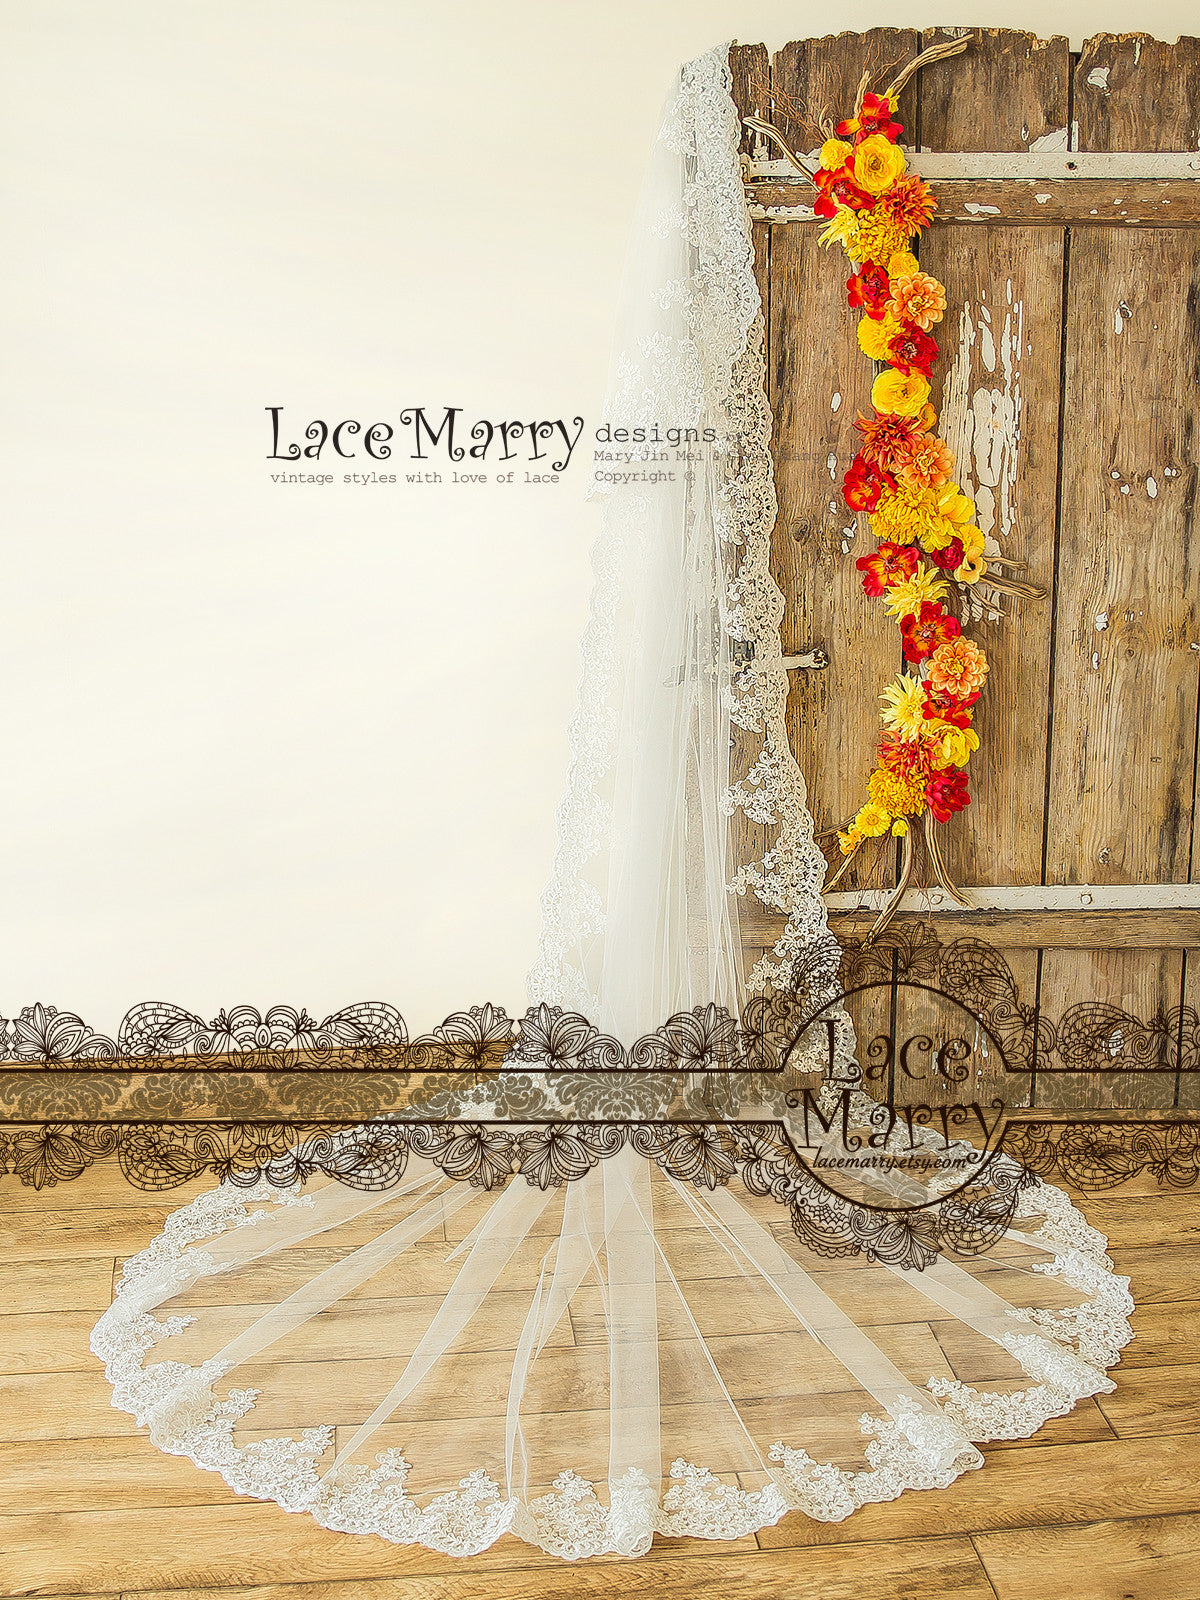 Alencon Lace Edge Cathedral Tulle Ivory Wedding Veil, Simple Long